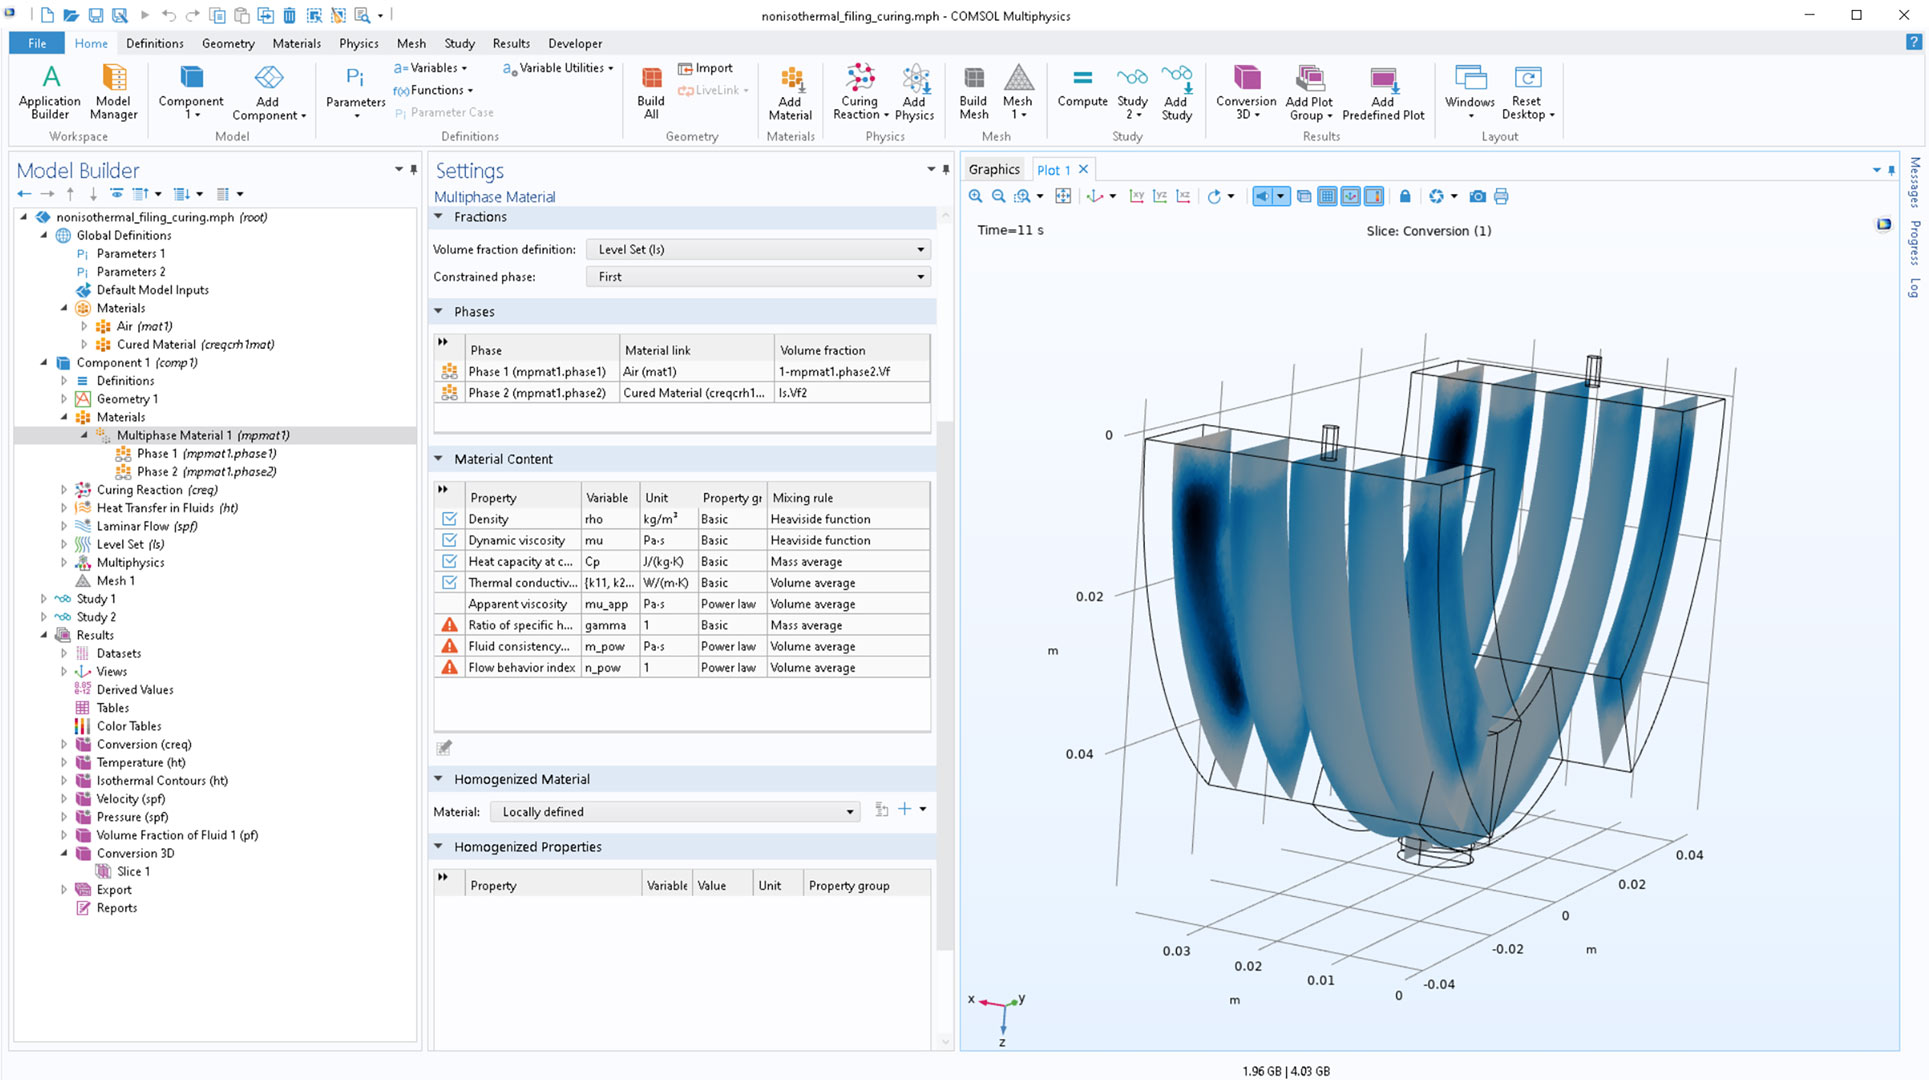 The COMSOL Multiphysics UI showing the Model Builder with the Multiphase Material node highlighted, the corresponding Settings window, and a 3D model in the Graphics window.